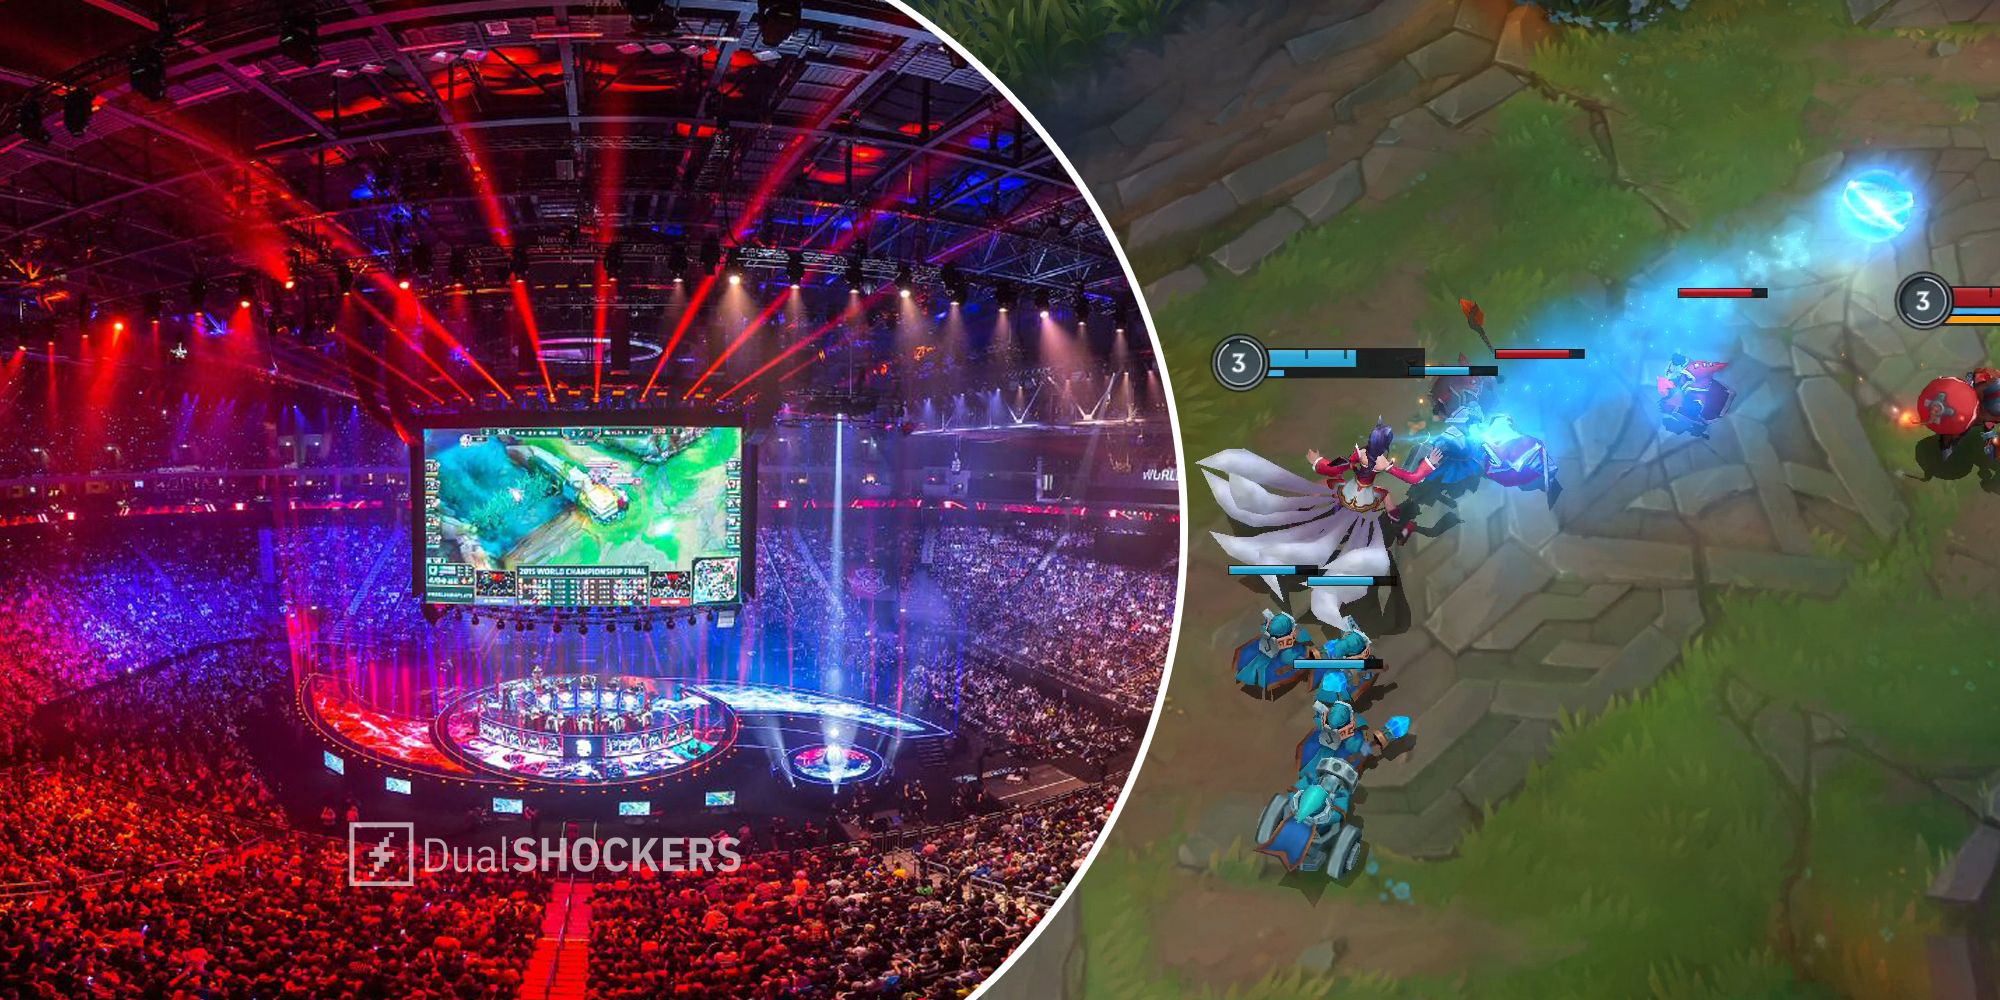 League of Legends World Championship arena with crowd and League of Legends gameplay